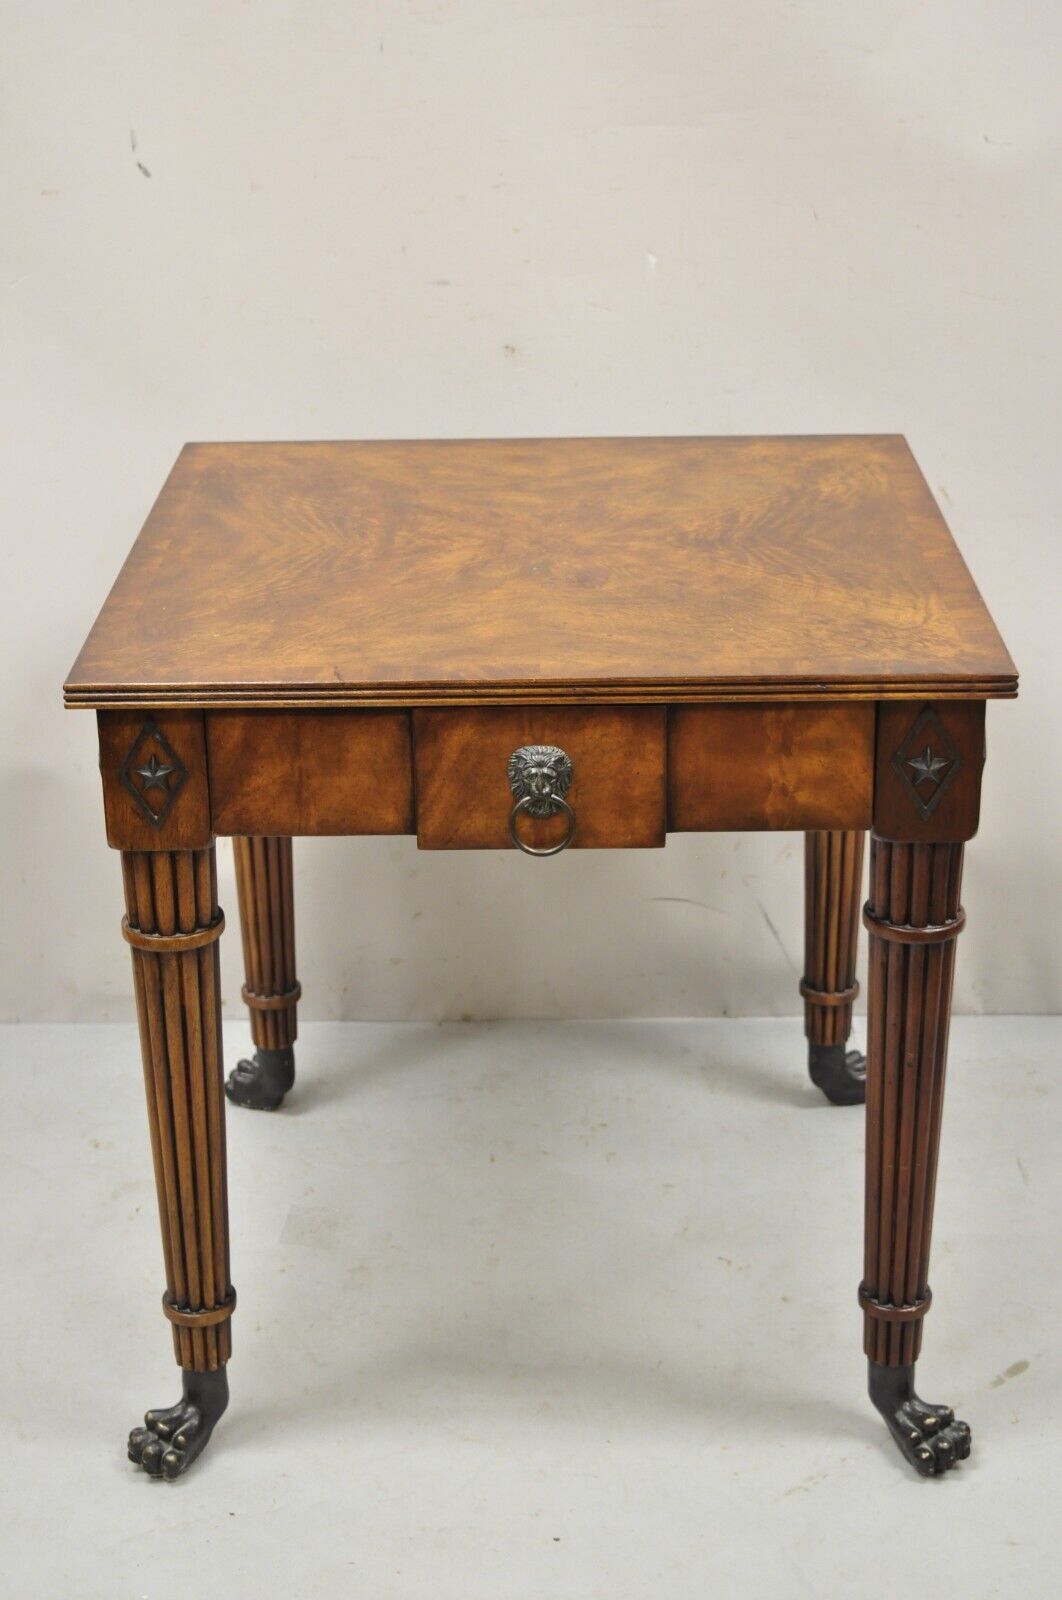 Theodore Alexander Althorp Regency Mahogany One Drawer Side Table A L50046